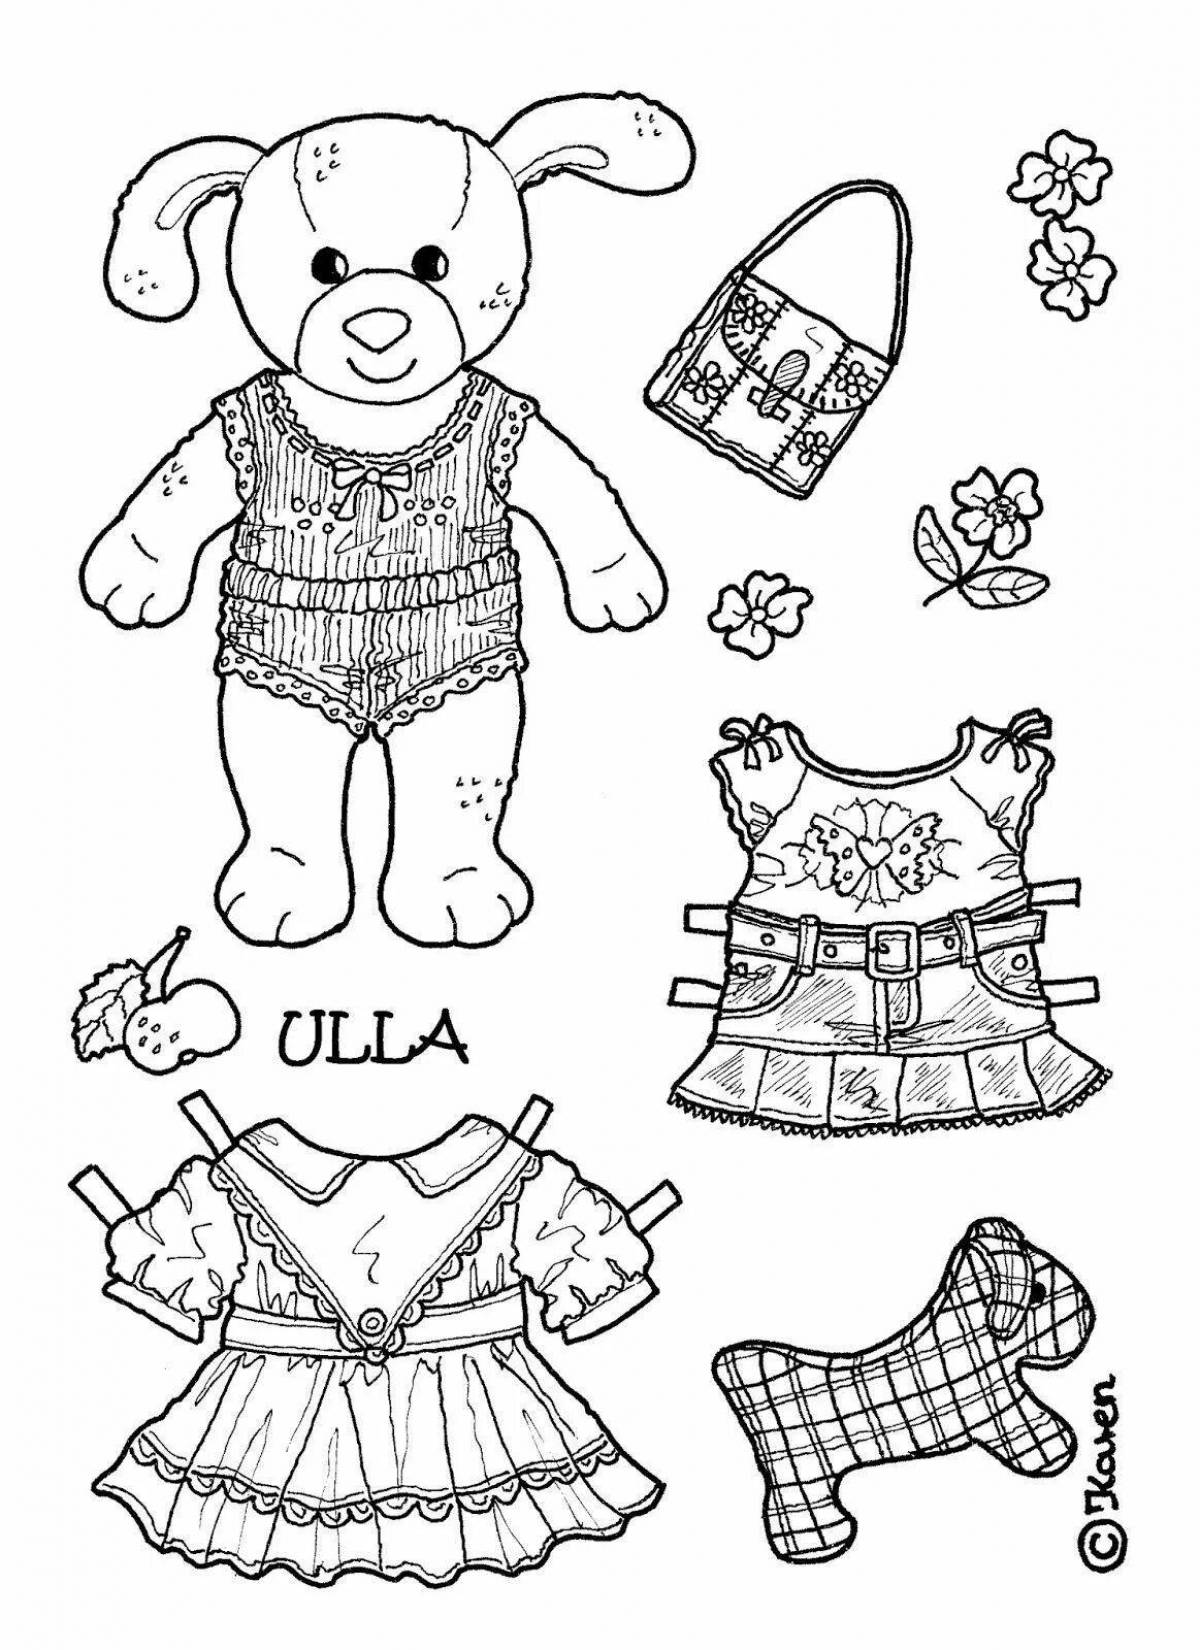 Colorful cat coloring pages with clothes to cut out